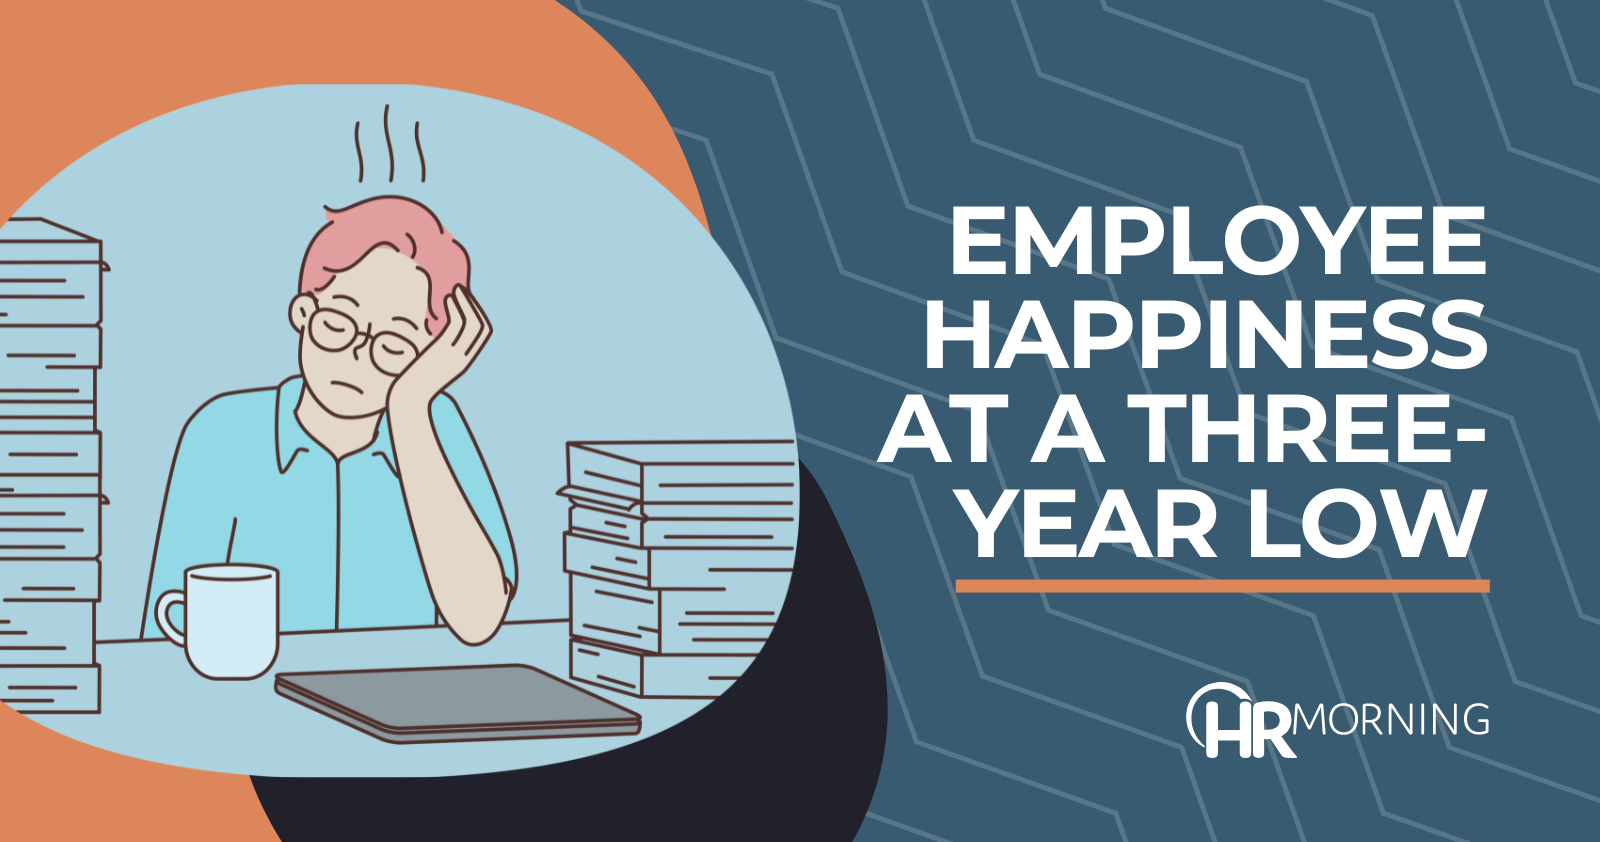 Employee happiness at a three-year low